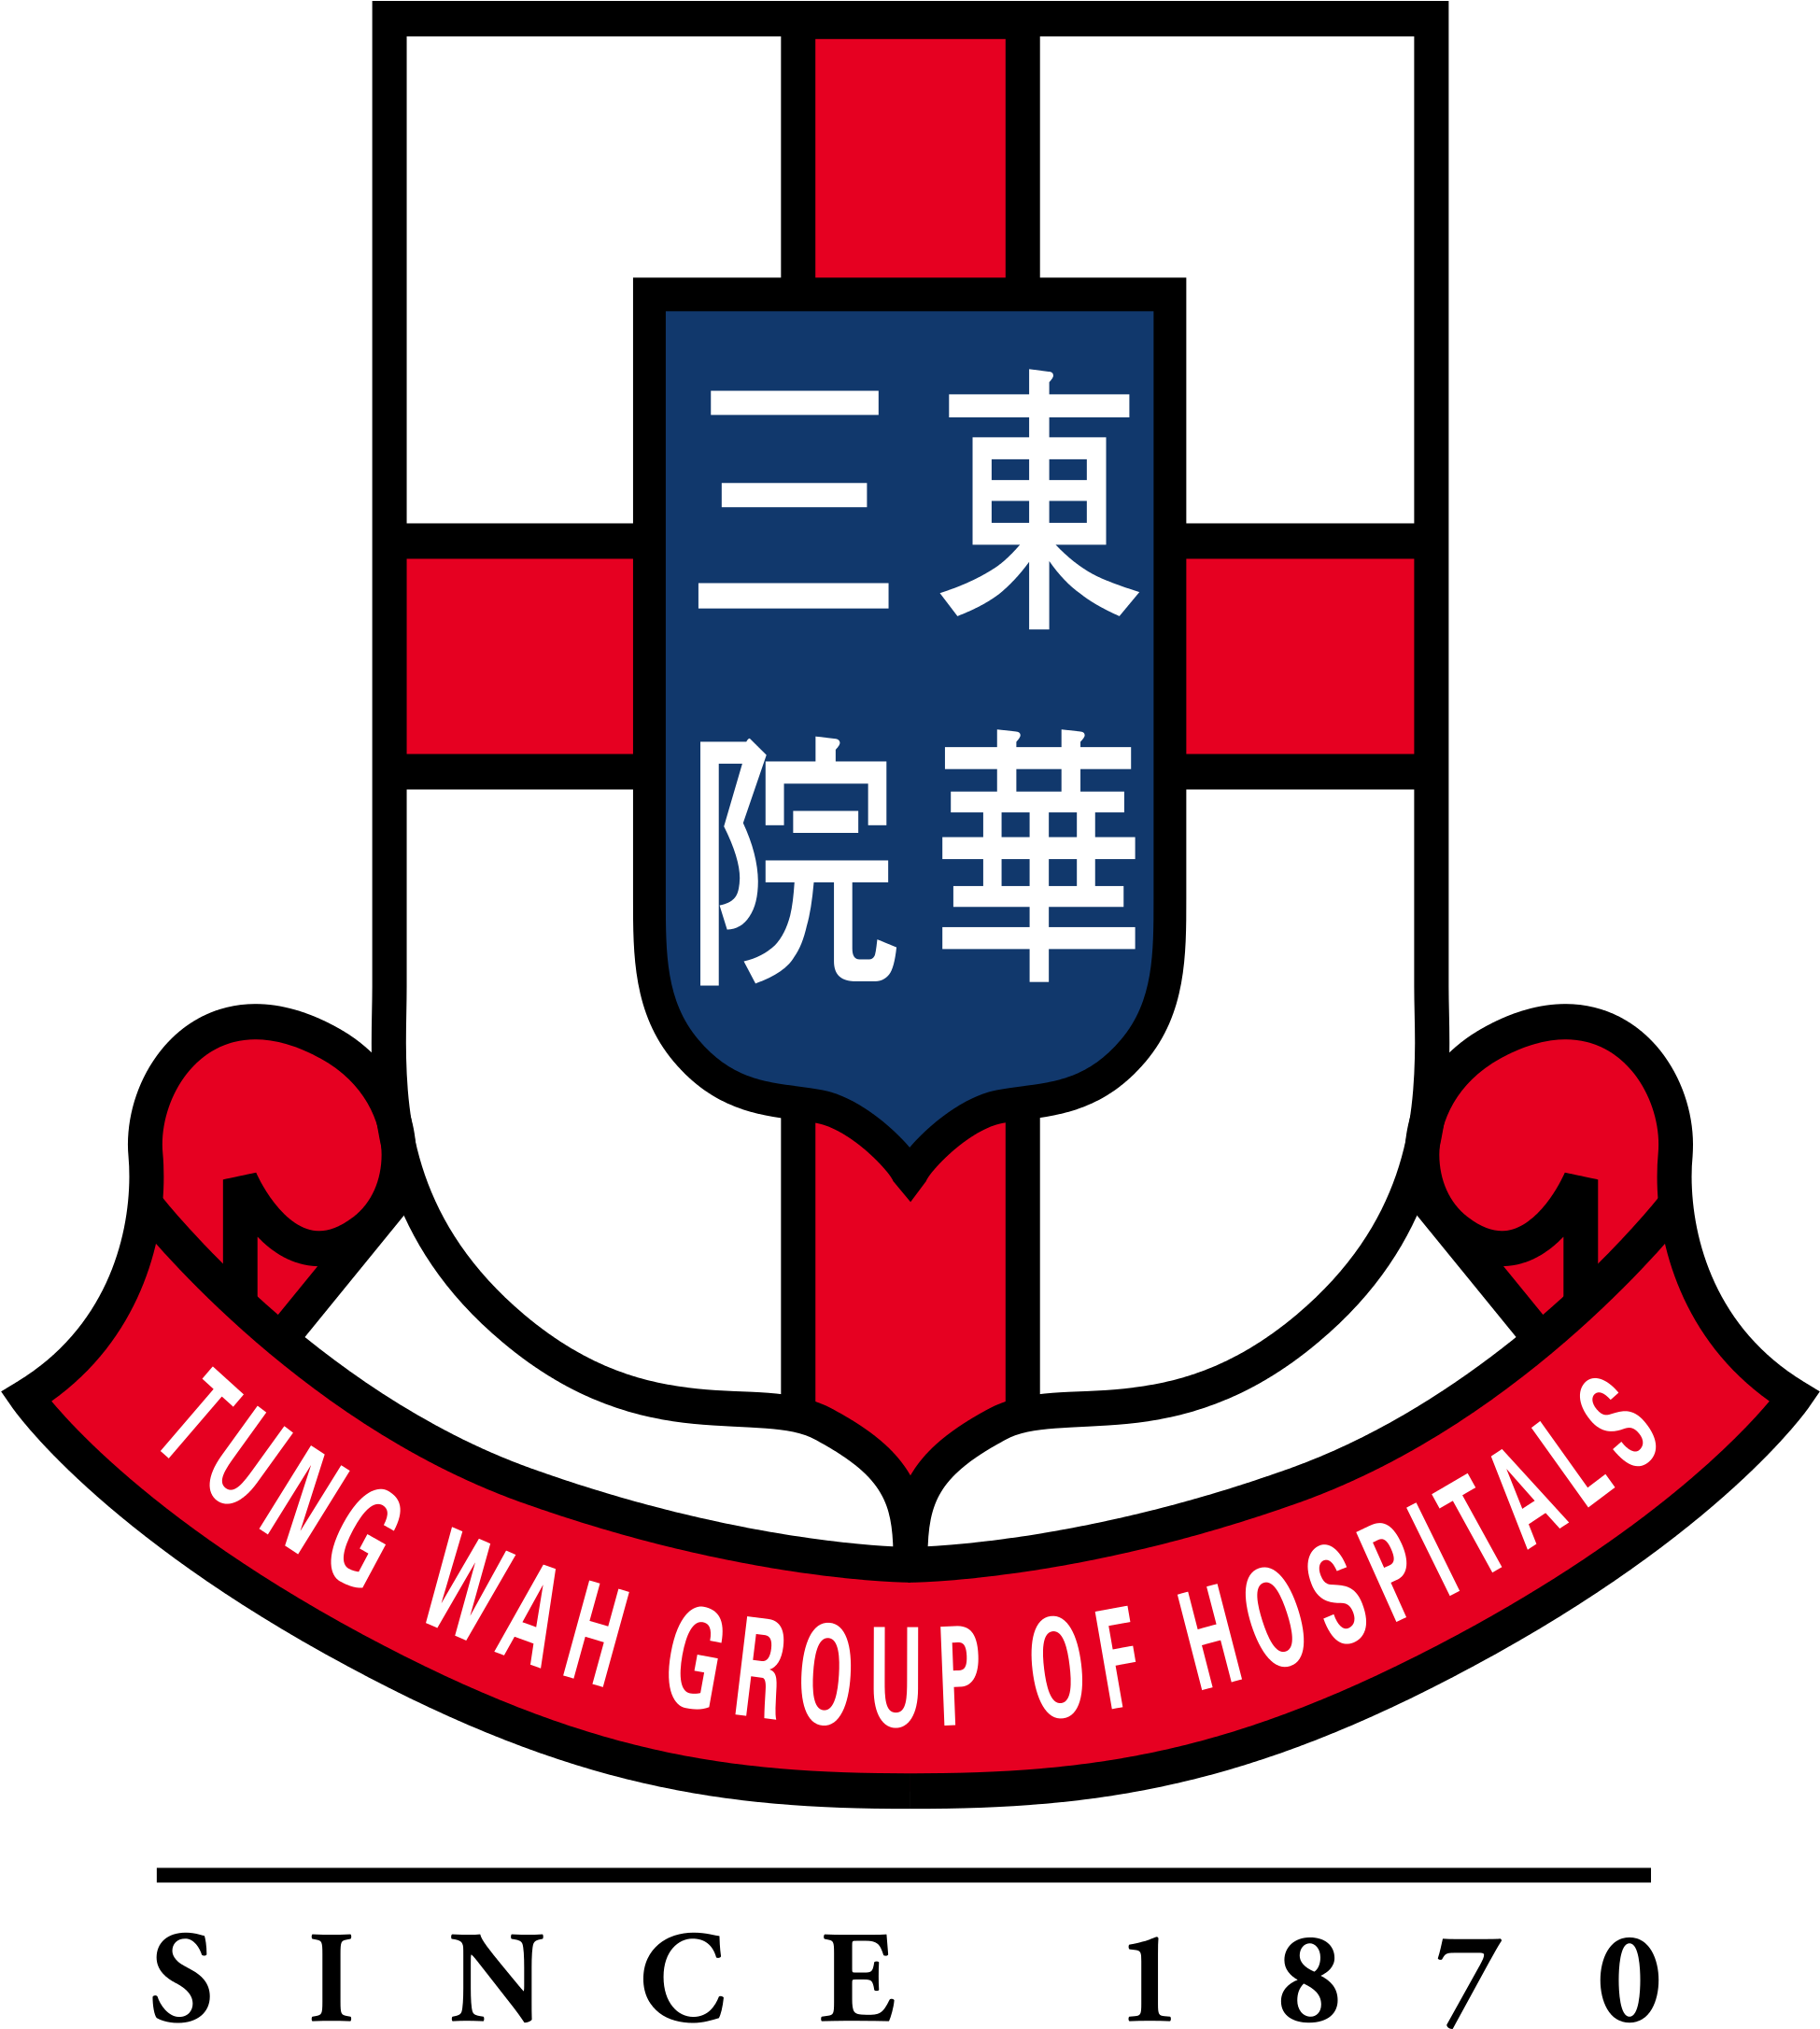 Open - Tung Wah Group Of Hospitals (2000x2172)